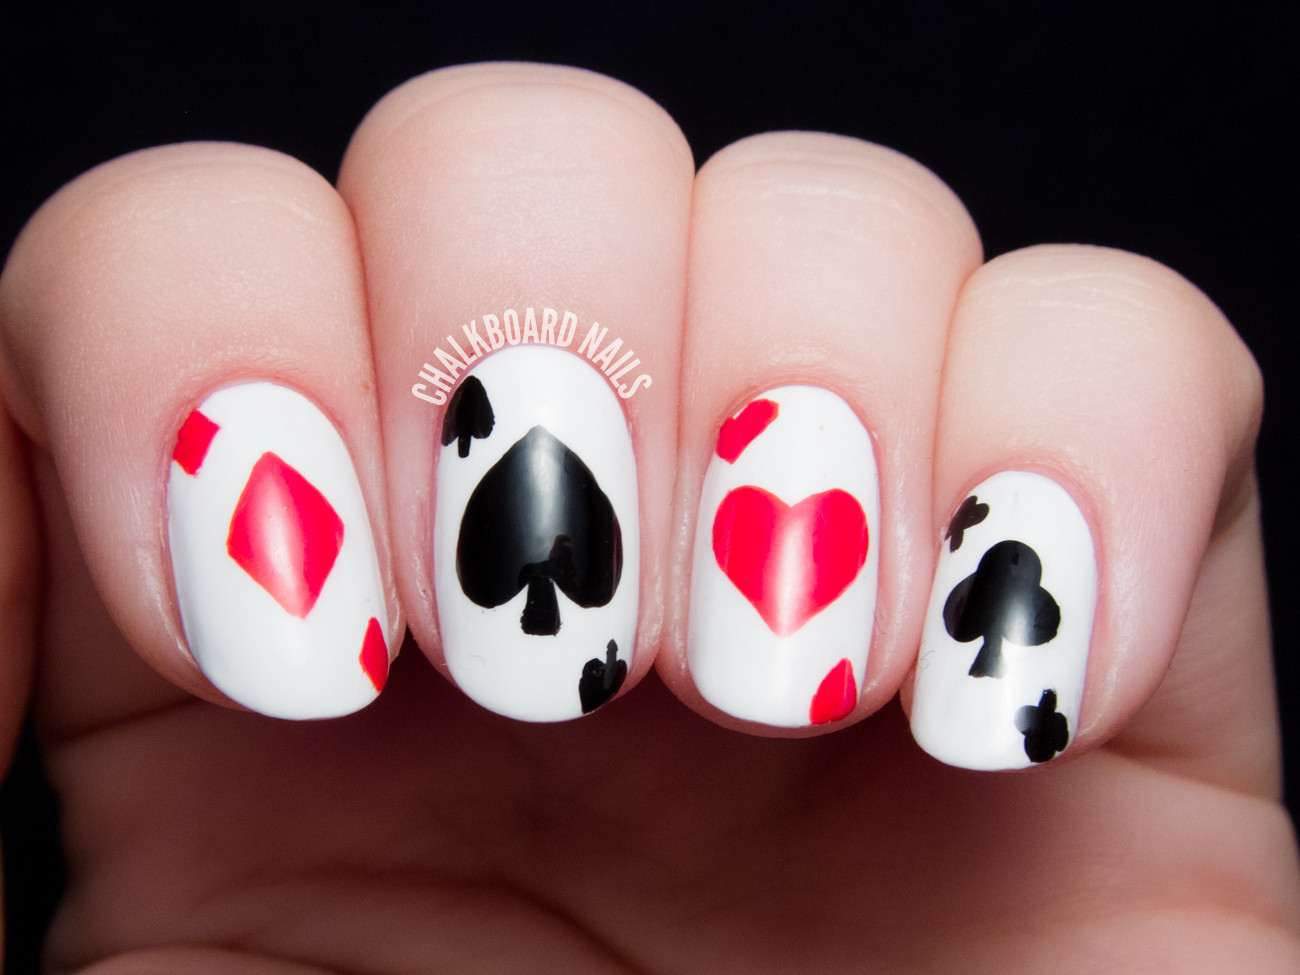 Queen Of Hearts Nail Designs
 f With Their Heads Queen of Hearts Nail Art